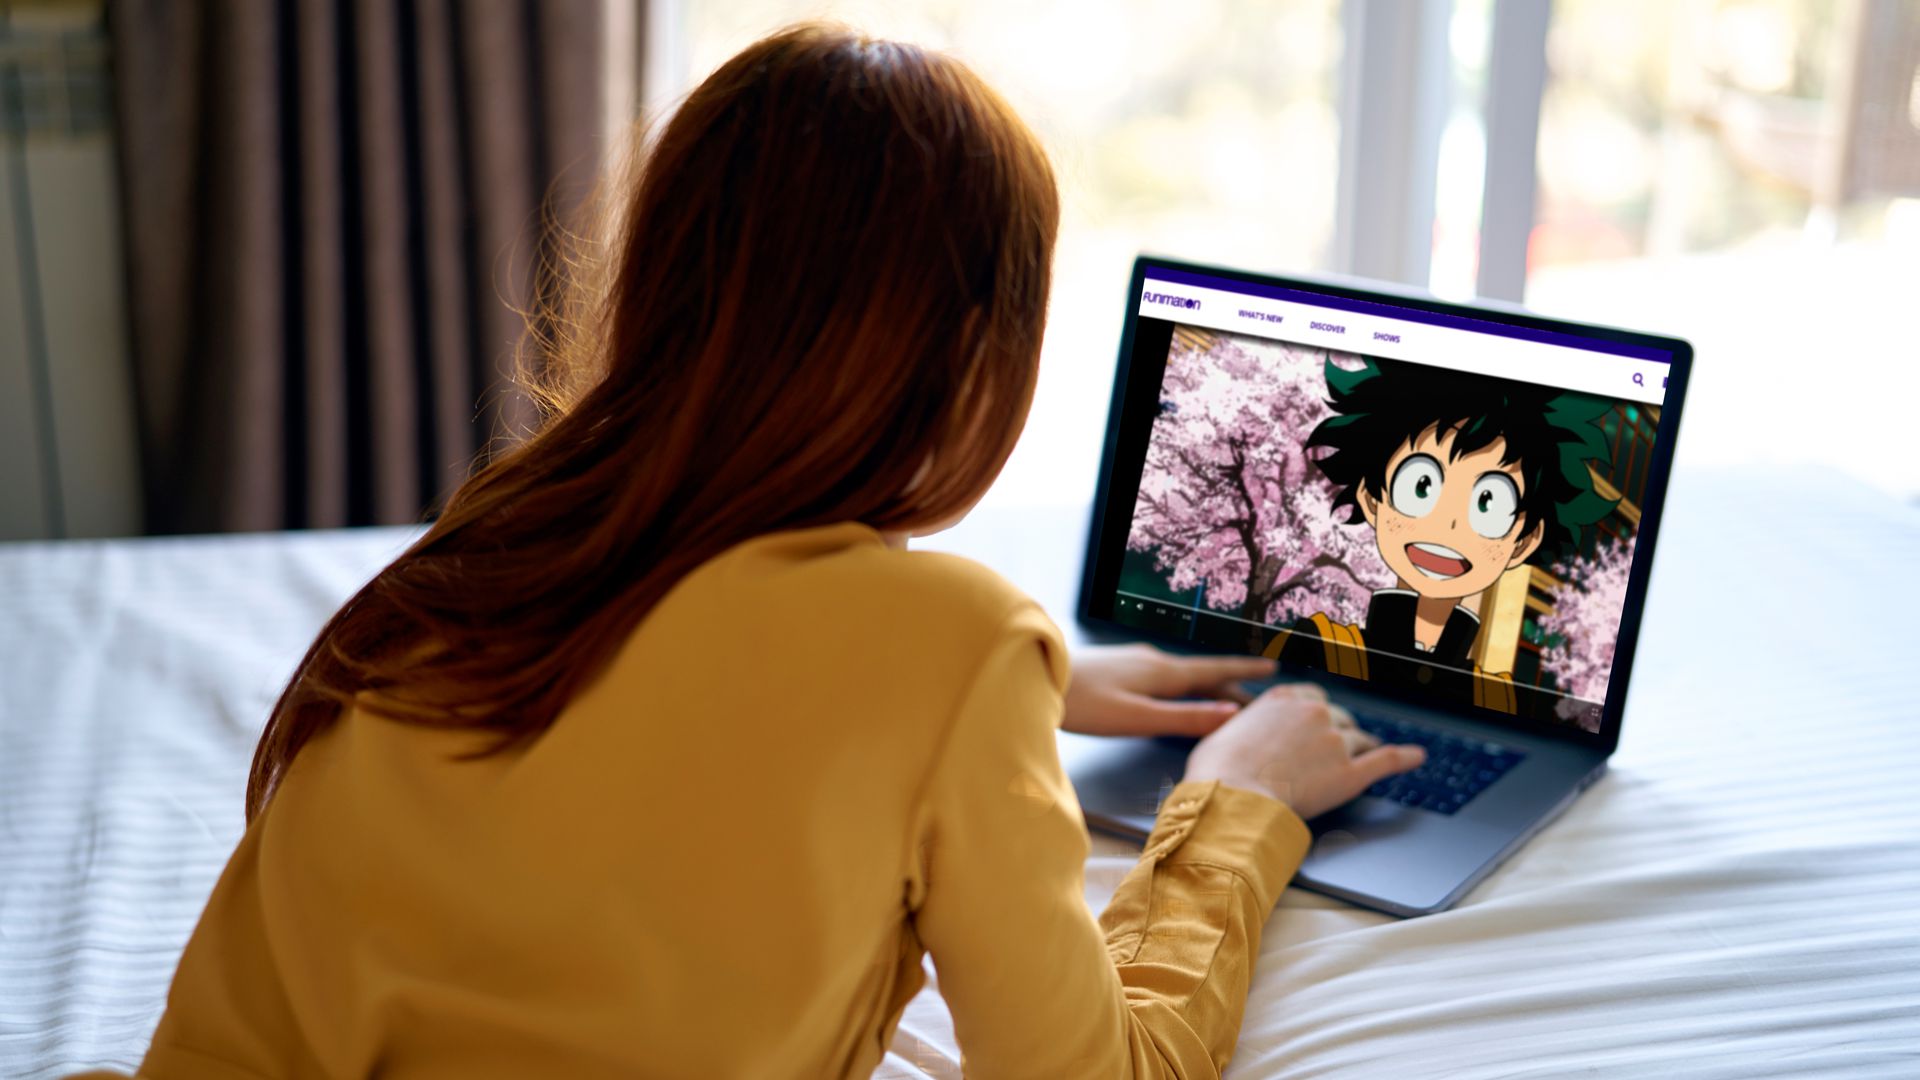 10 Reasons You Should Be Watching Anime If You Arent Already  The Nerd  Daily